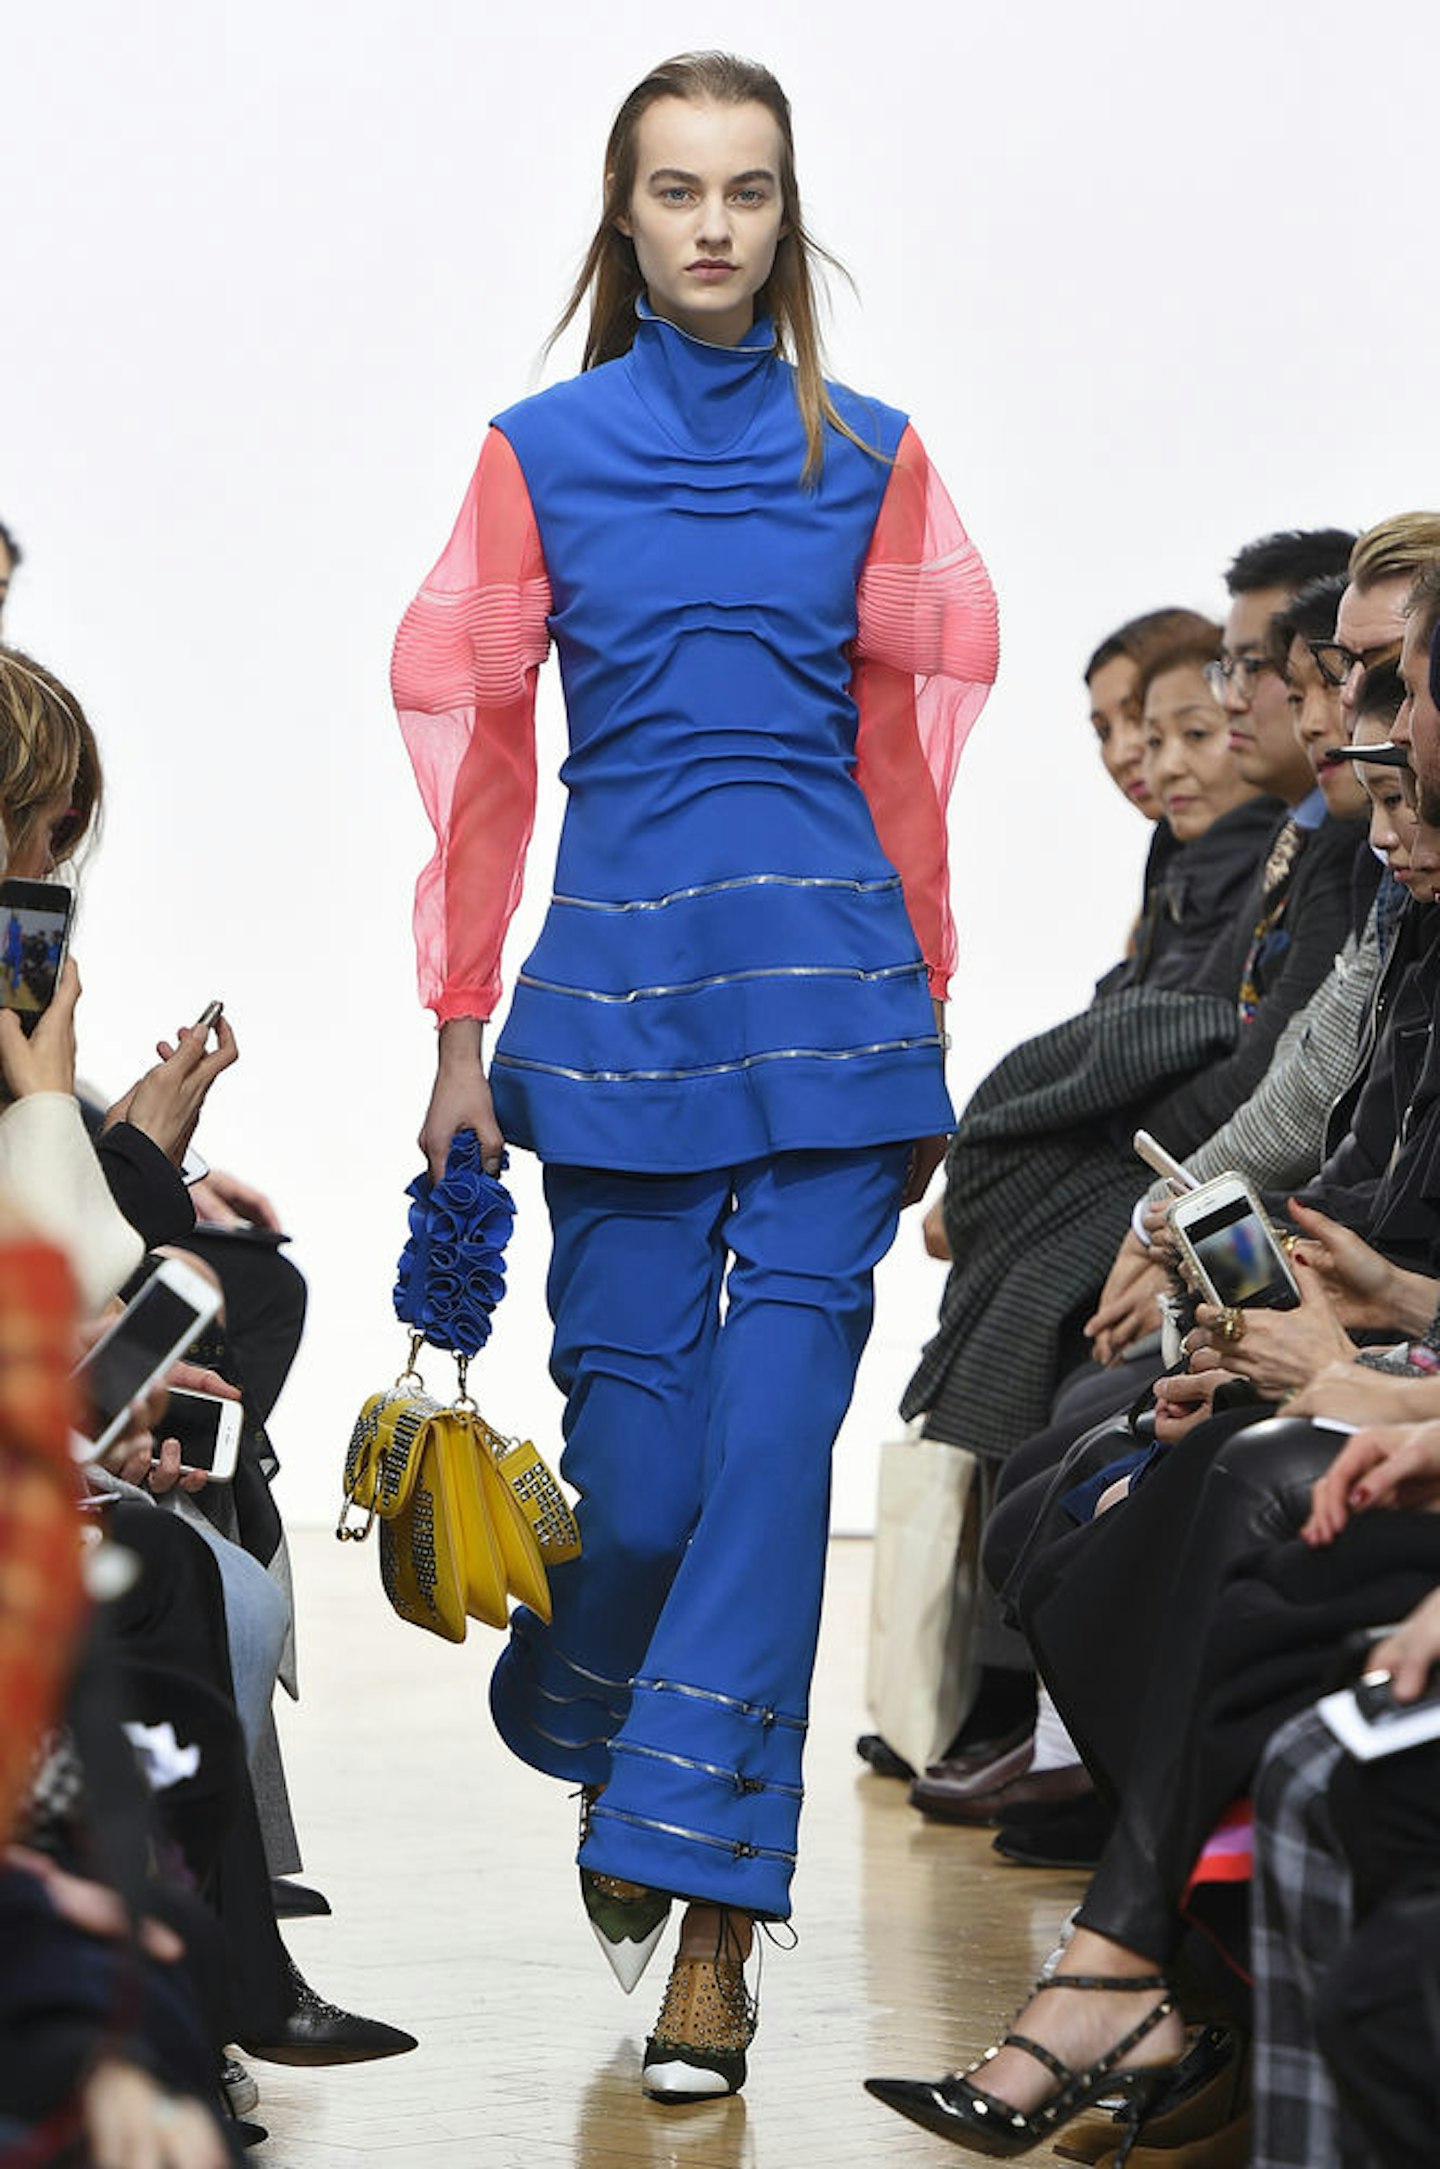 JW Anderson: 'The minute your brand can be predicted, you've got a problem', Life and style